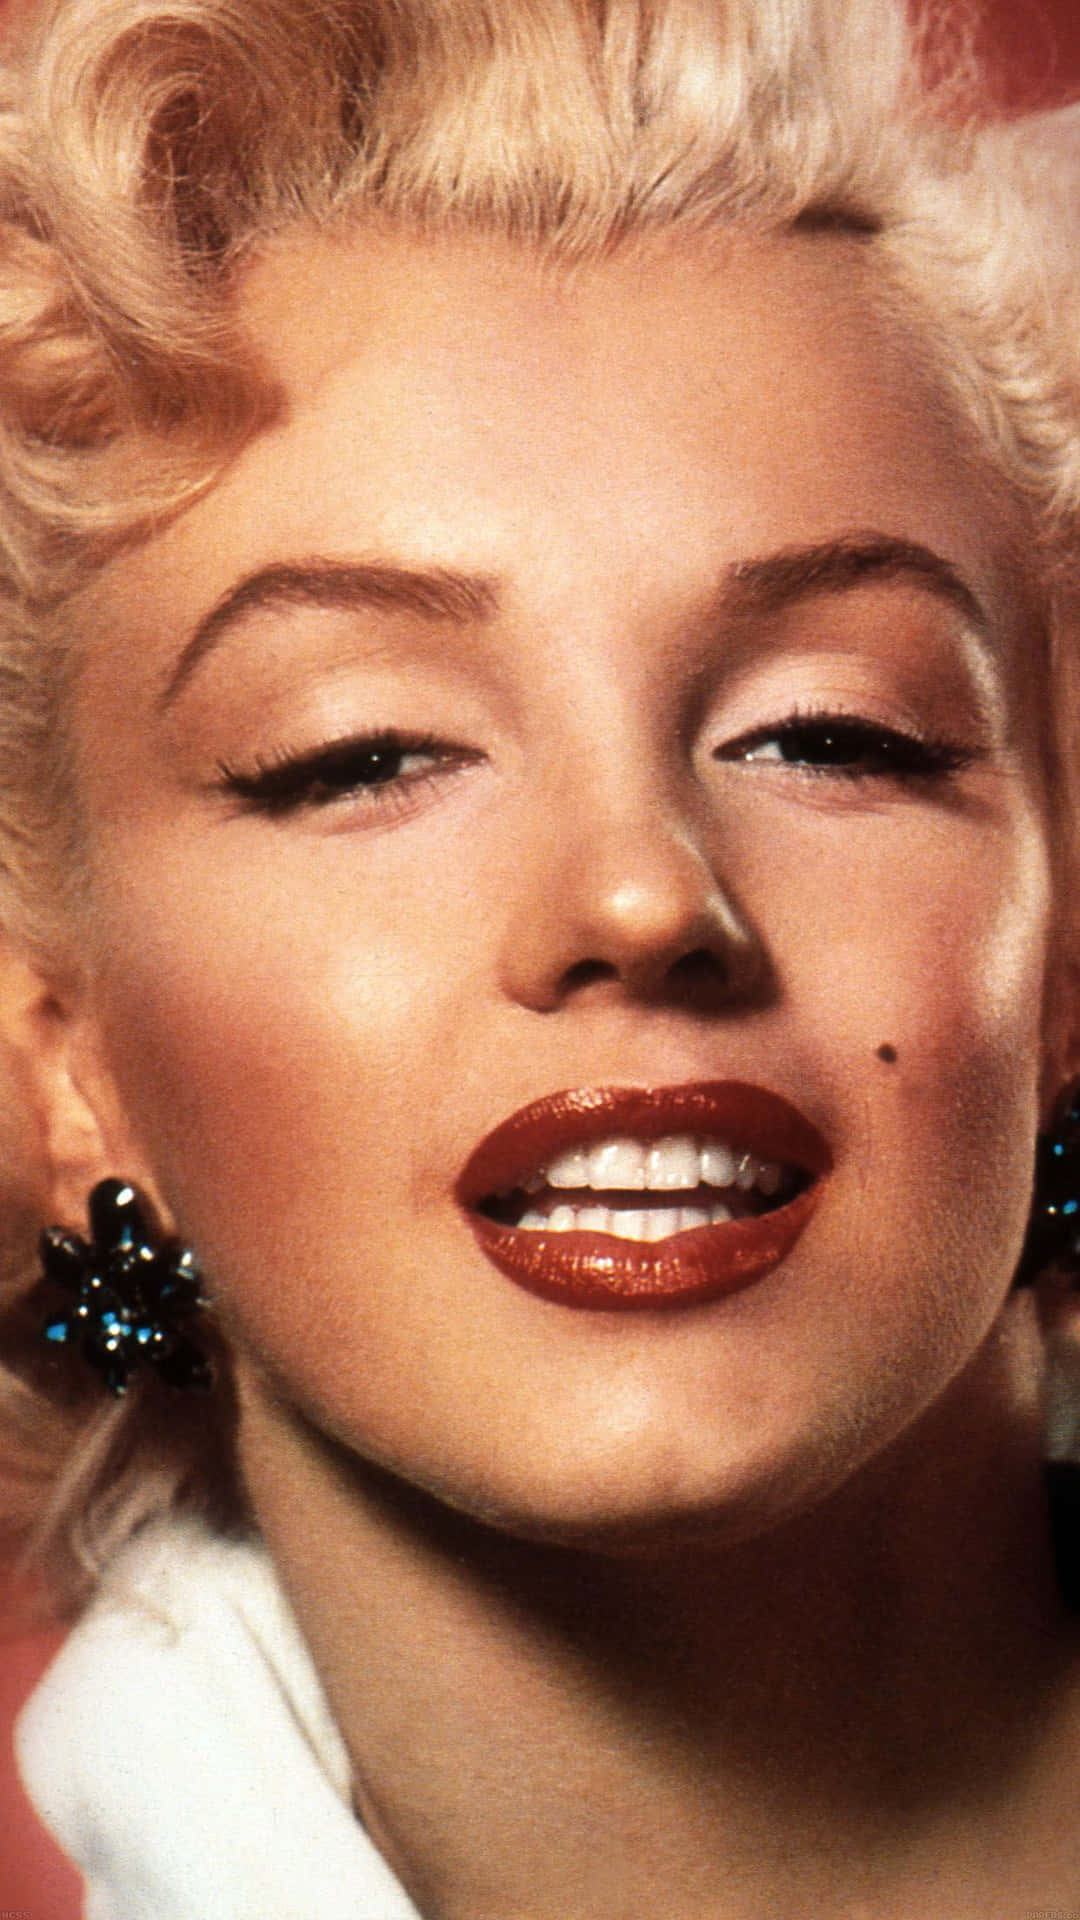 "Celebrate the timeless beauty of Marilyn Monroe with this iconic iPhone wallpaper" Wallpaper